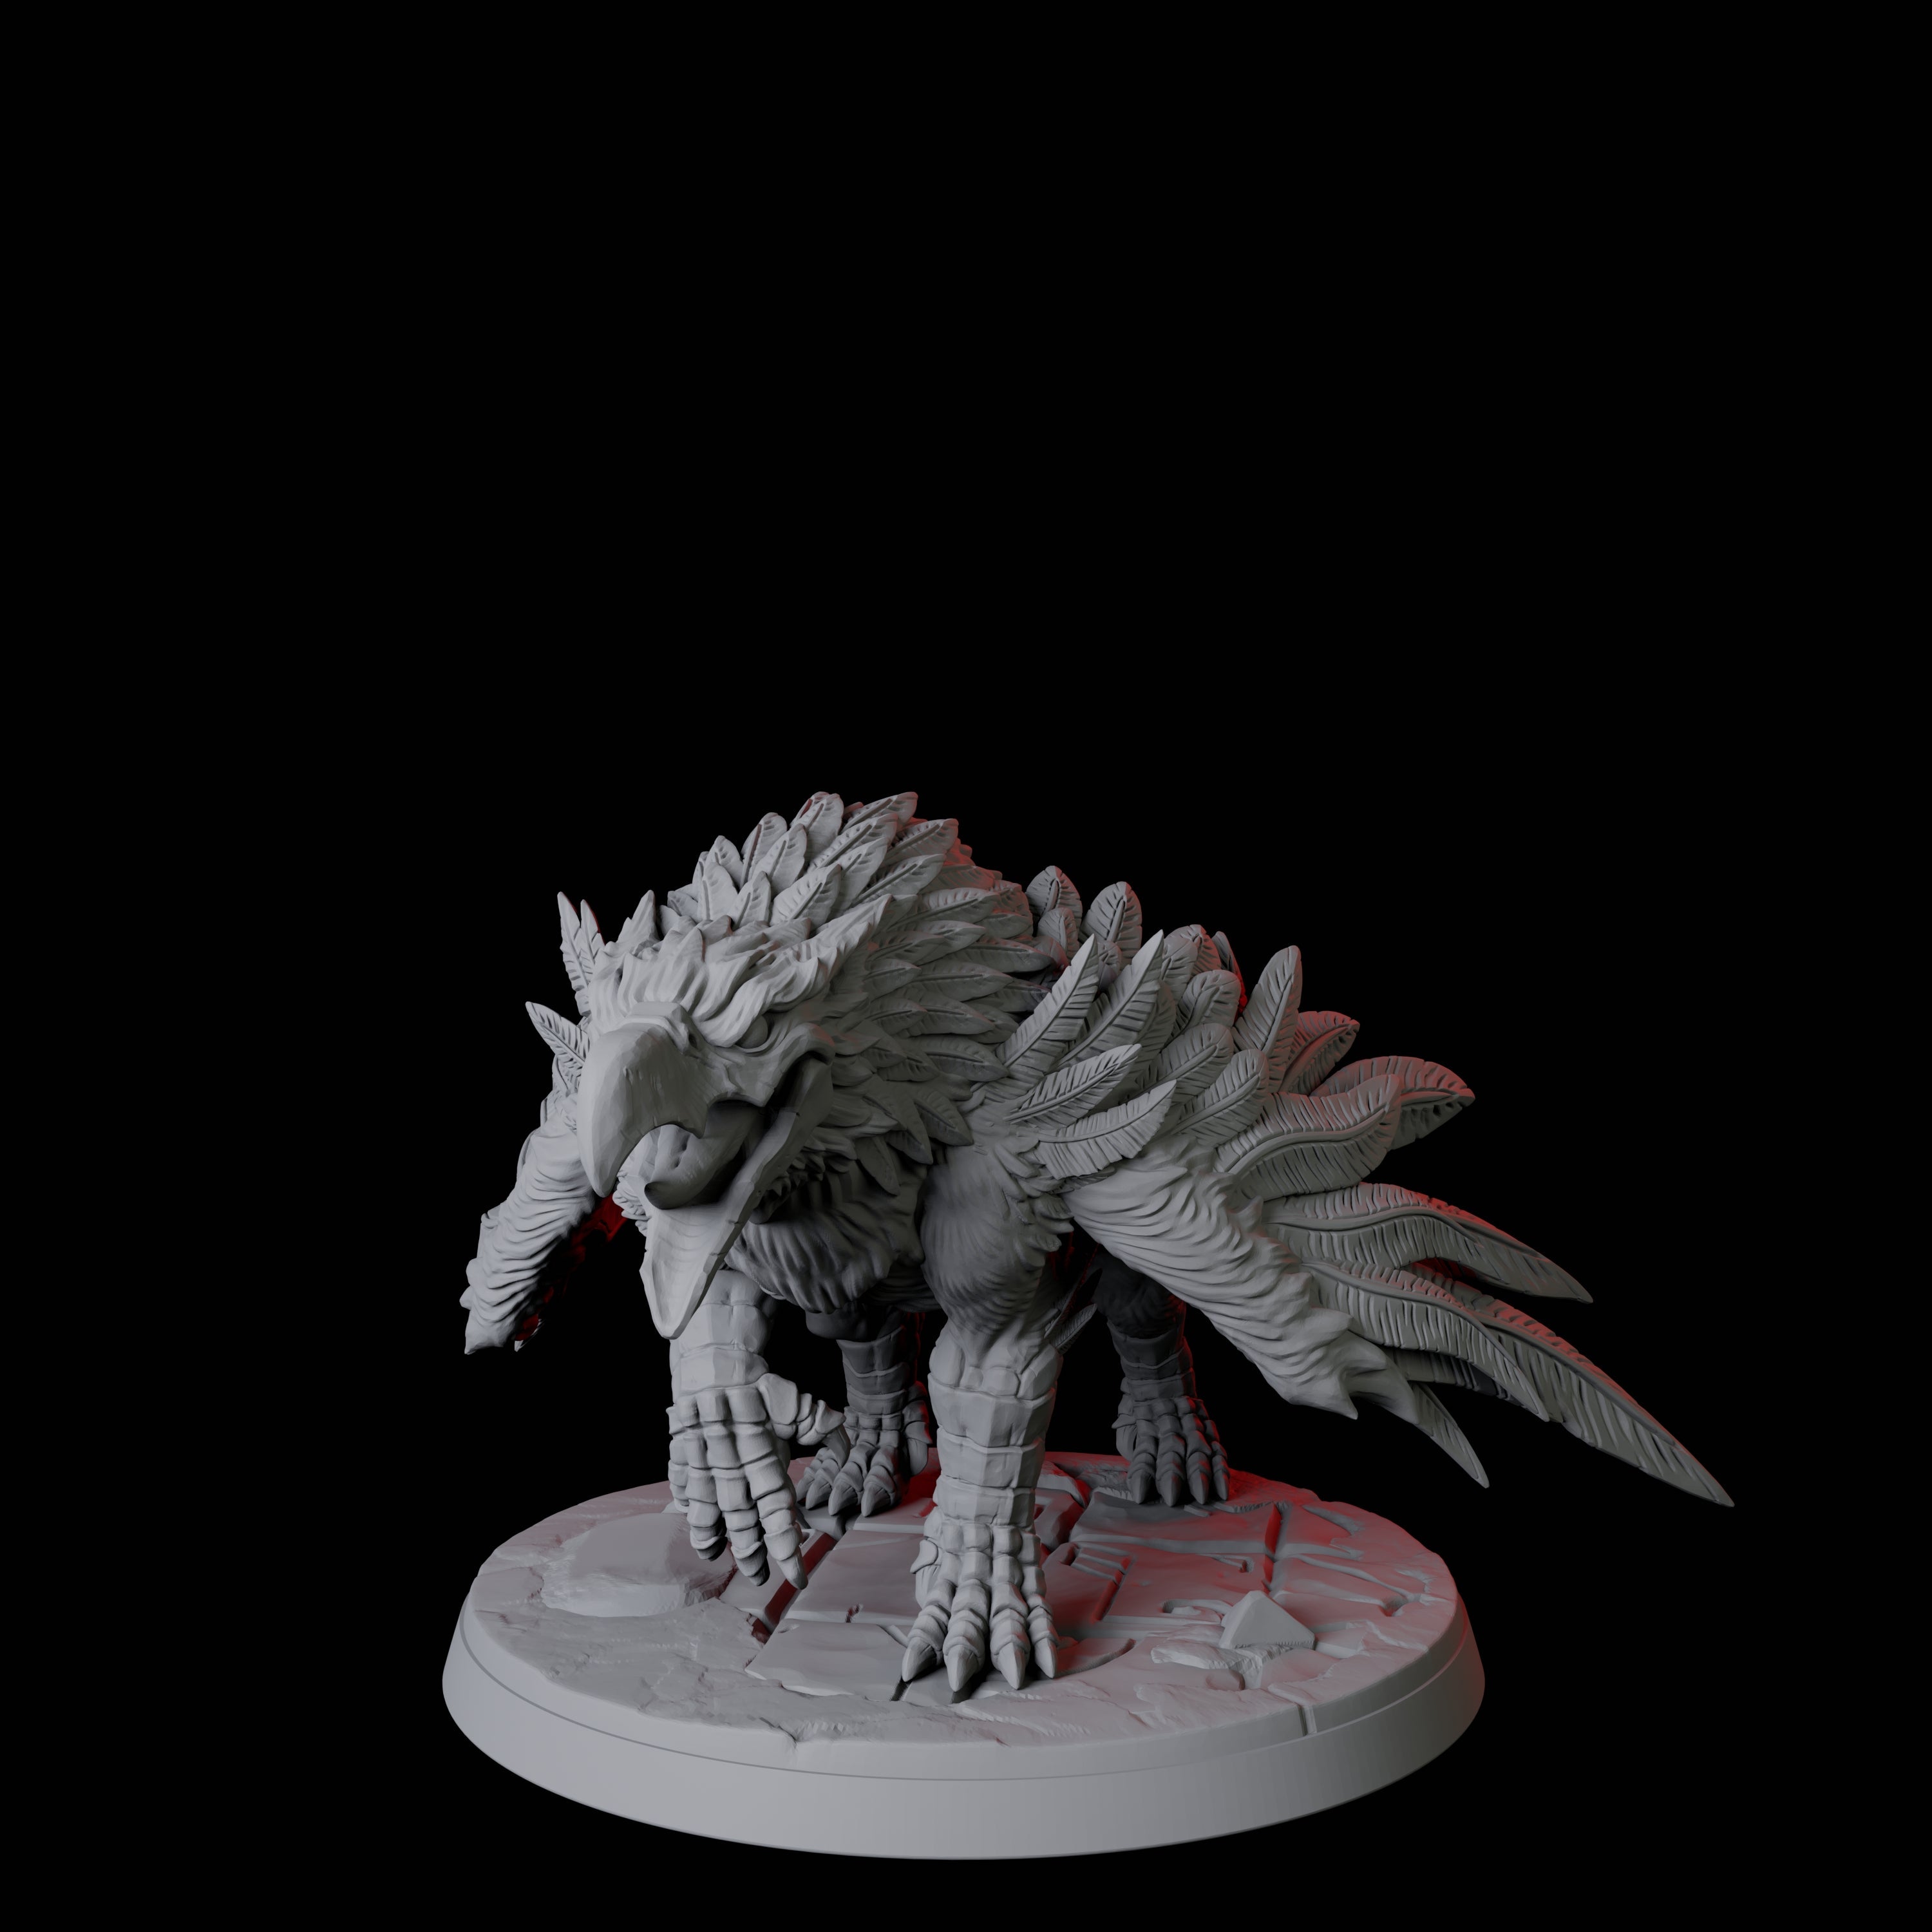 Leaping Griffon D Miniature for Dungeons and Dragons, Pathfinder or other TTRPGs